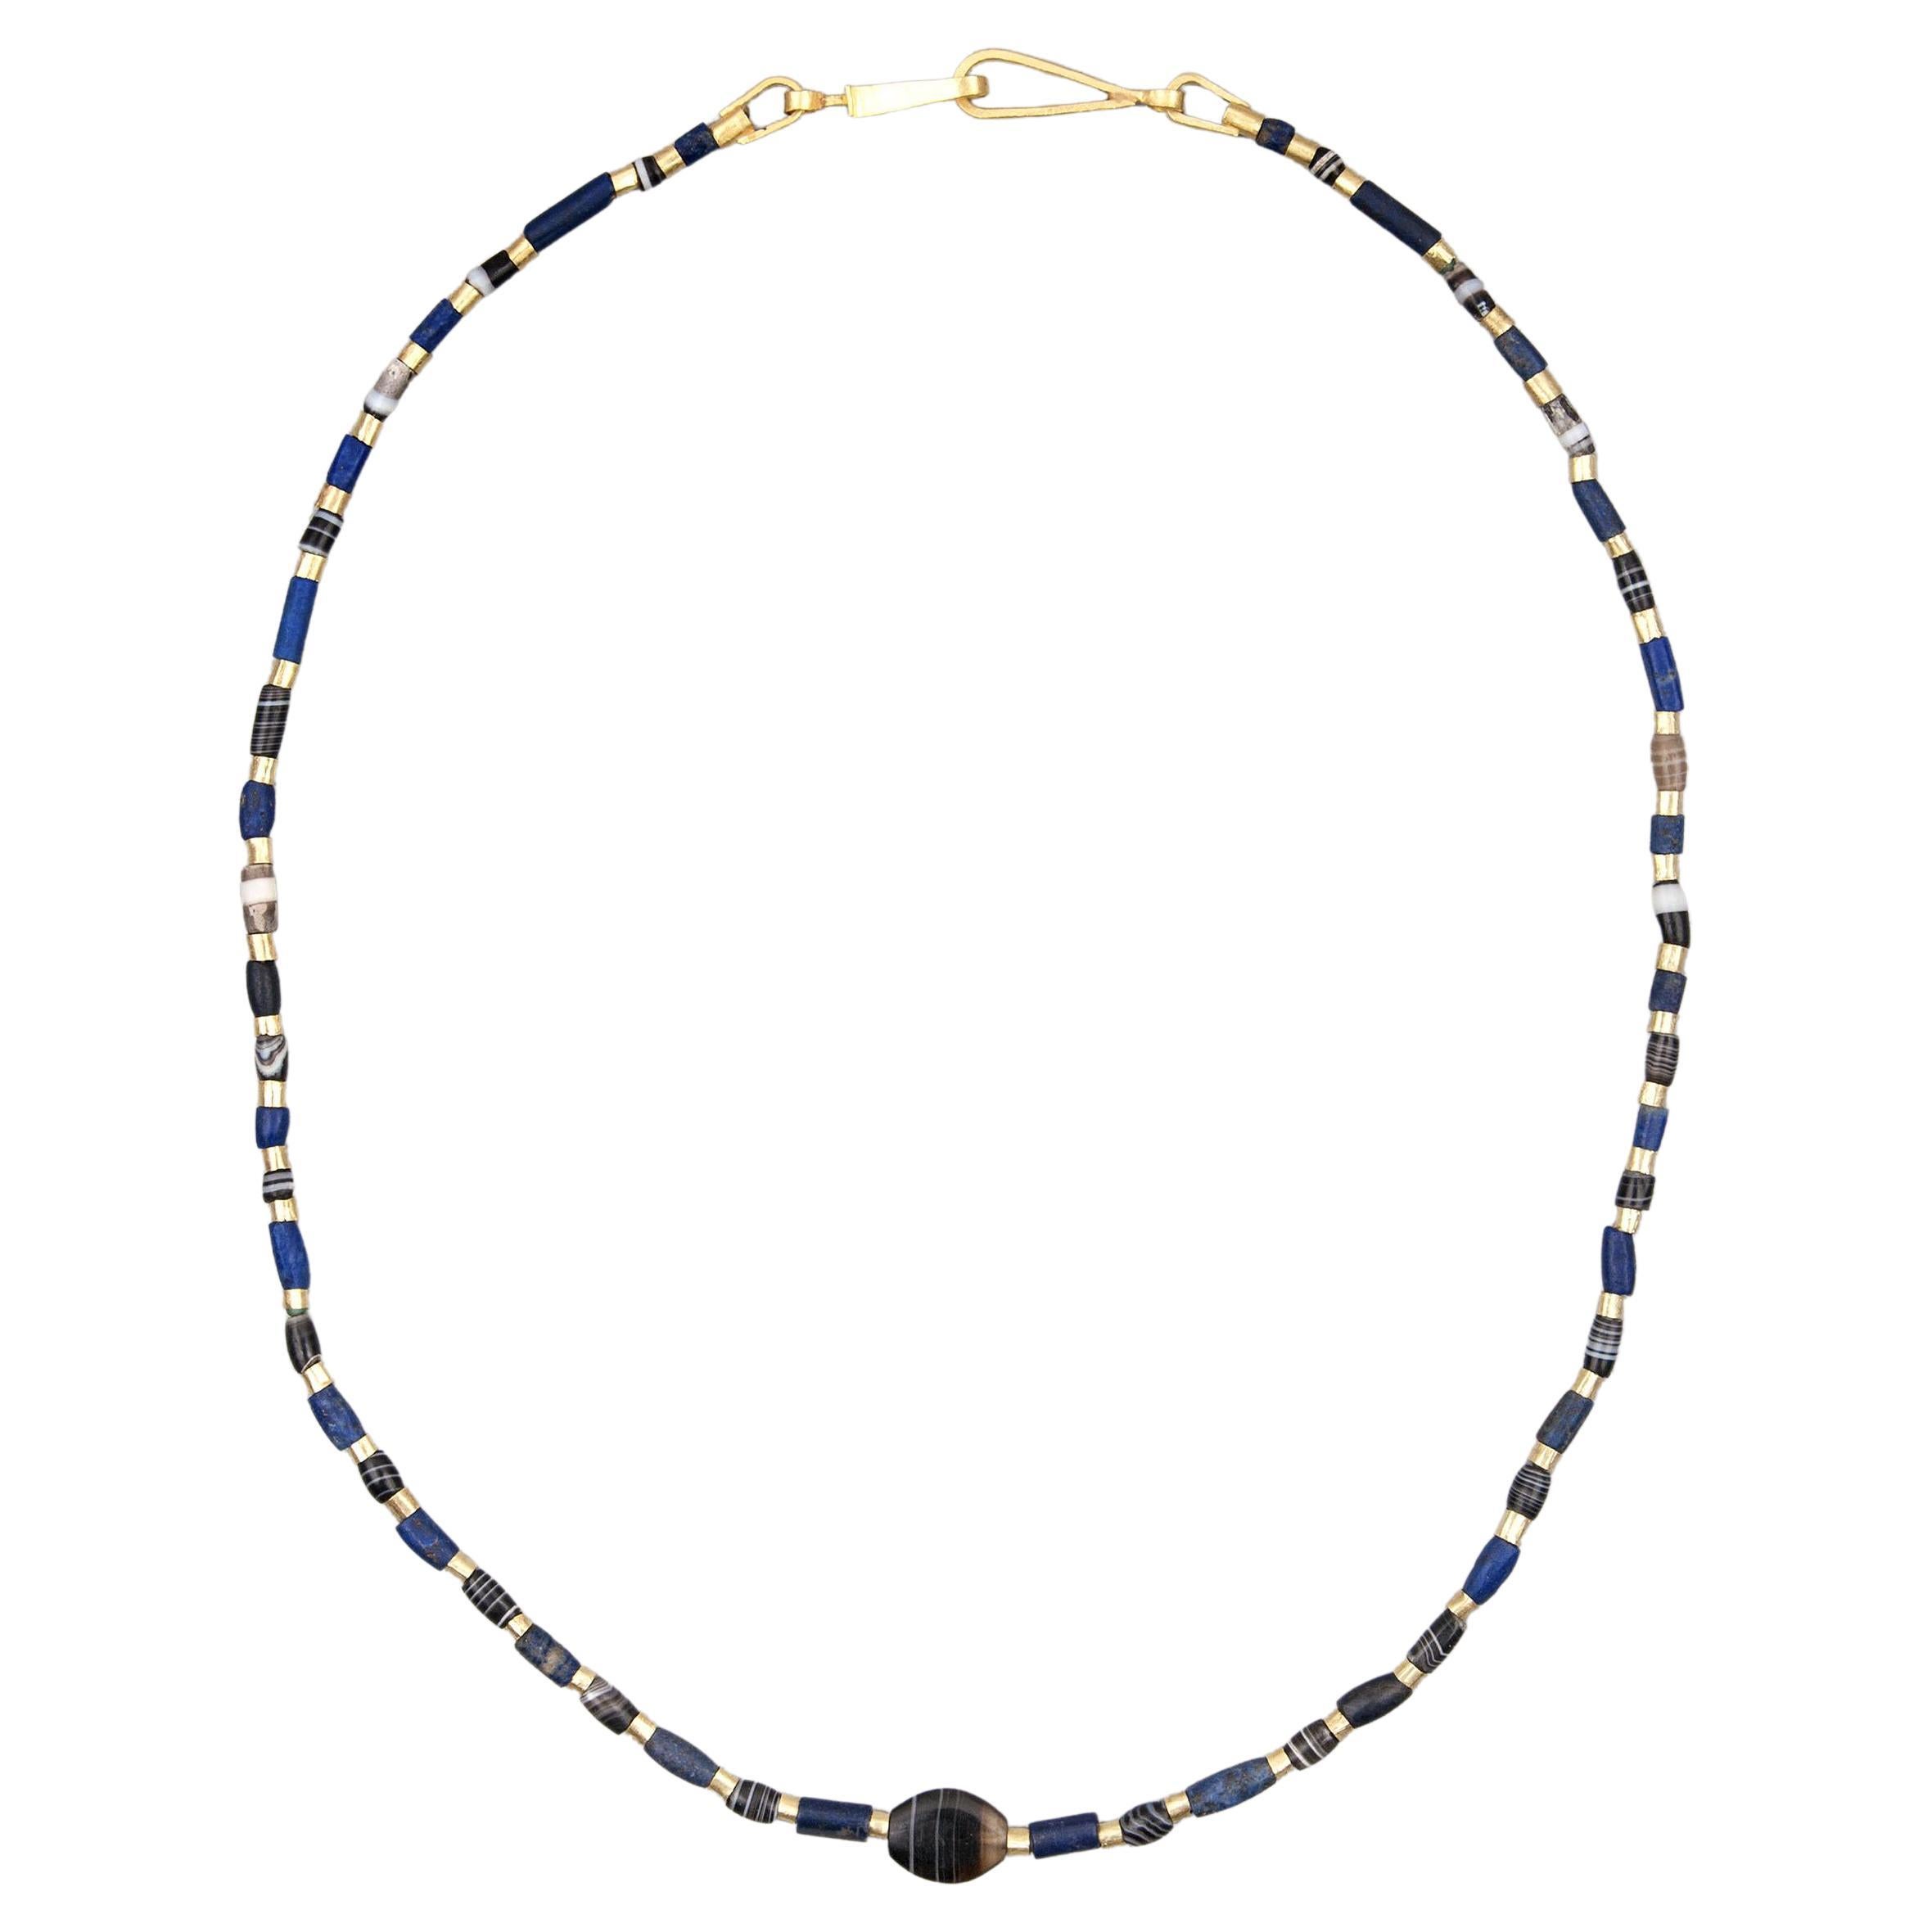 Ancient Onyx and Lapis Lazuli Beads, 22k Gold Tubes, Handmade Clasp For Sale